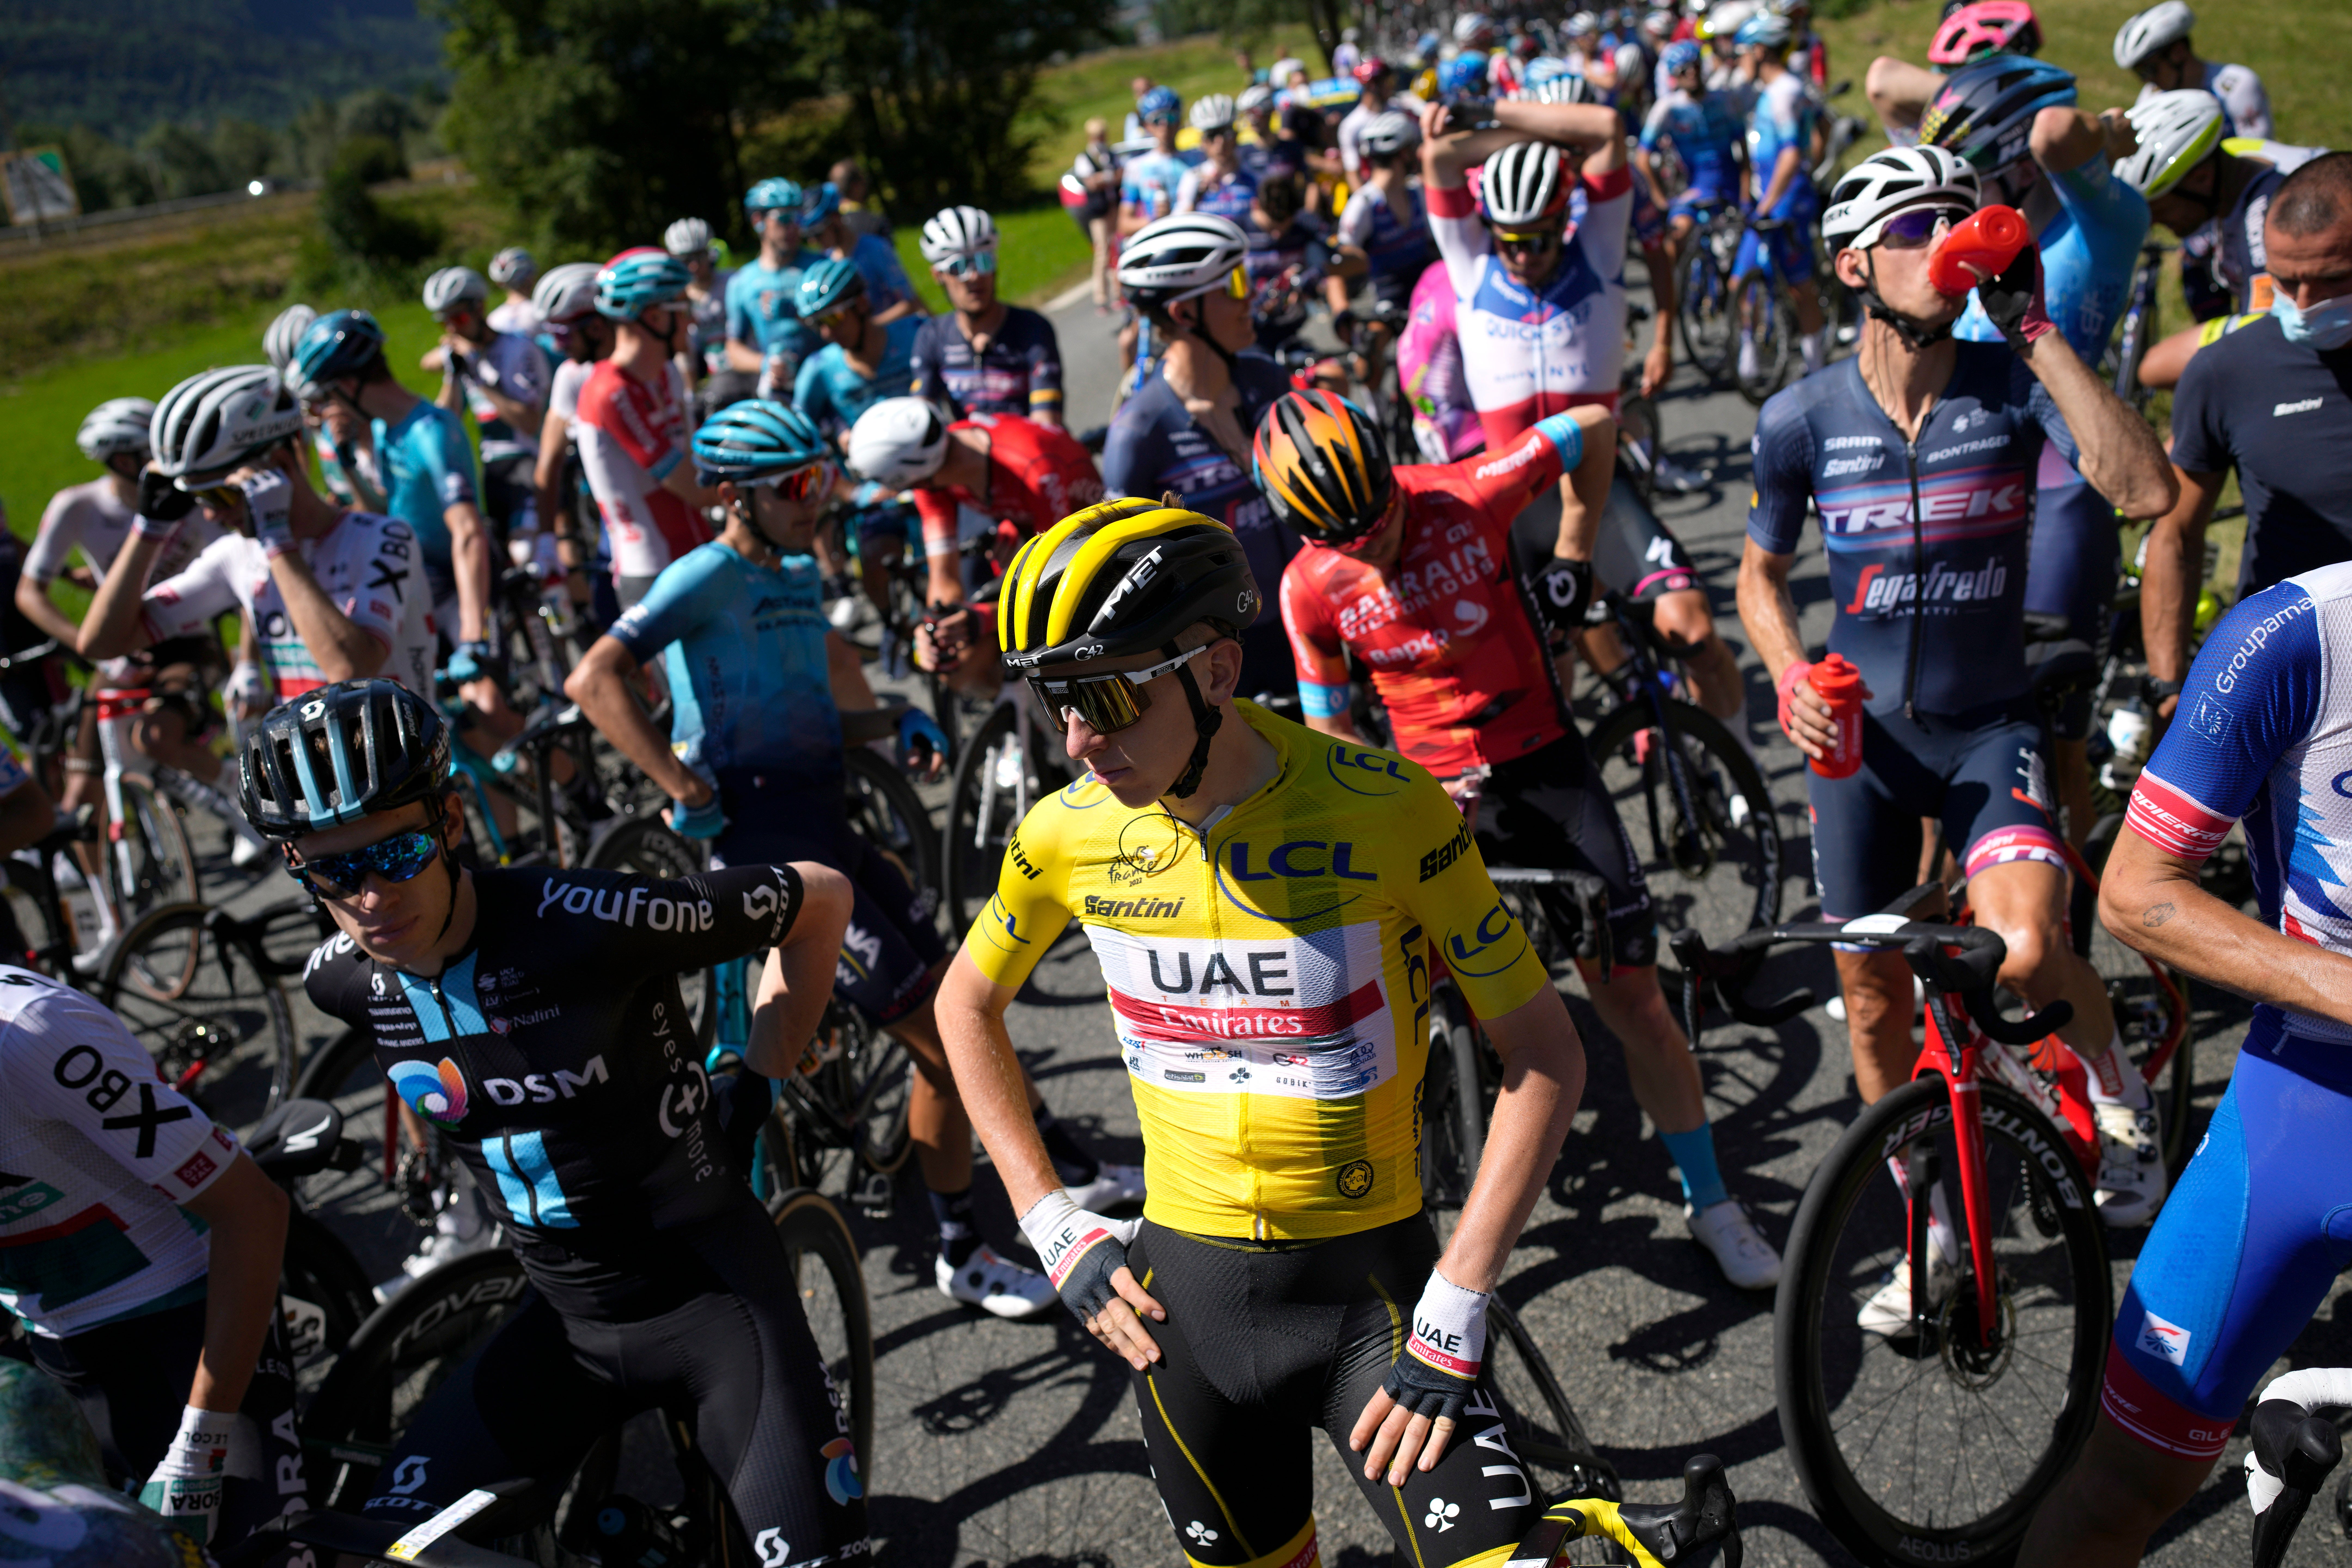 Tadej Pogacar was held up by protestors before narrowly holding on to his yellow jersey